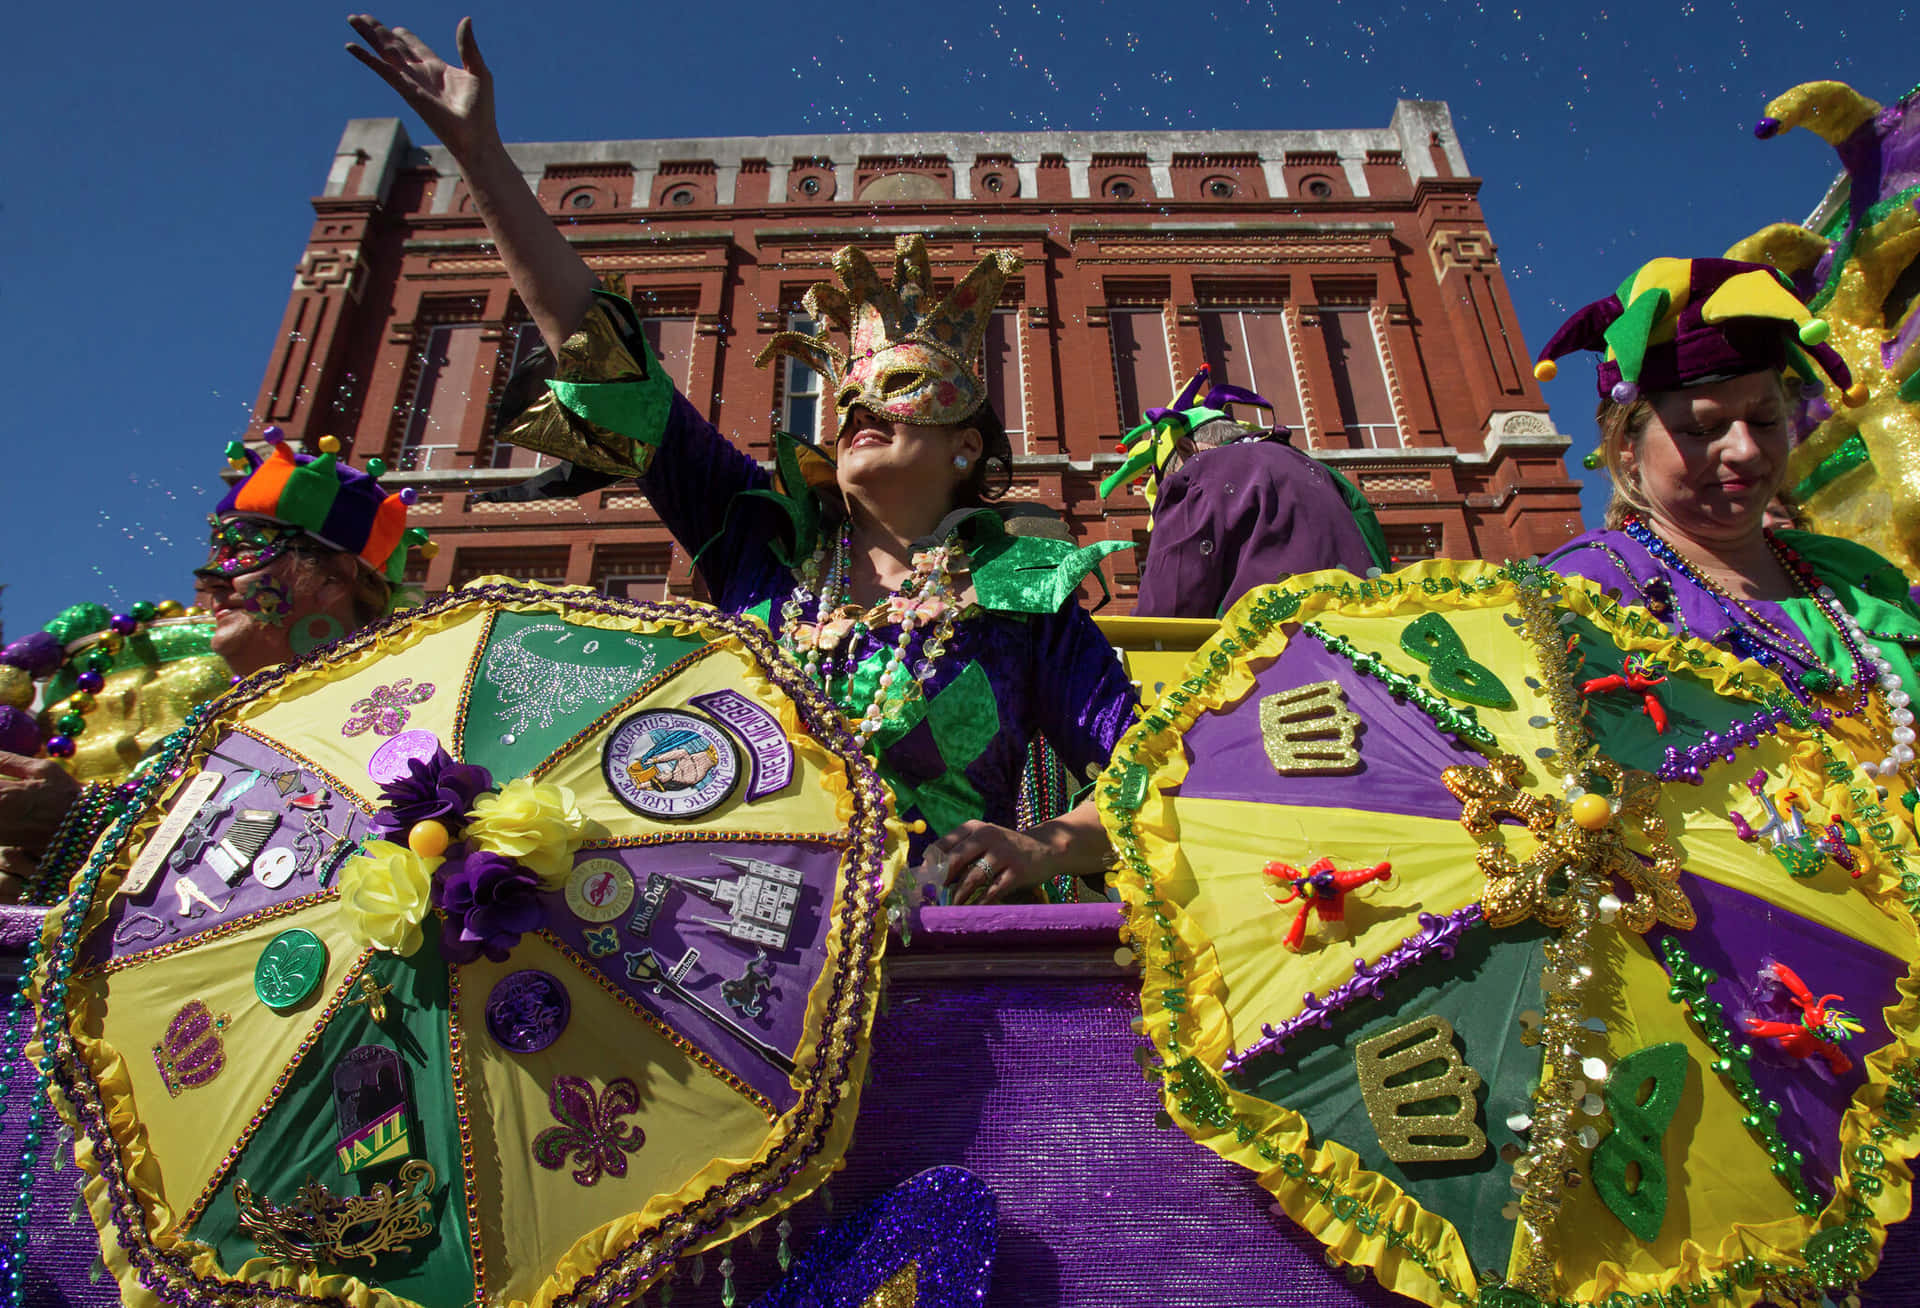 Celebrate Mardi Gras with Colors and Music!